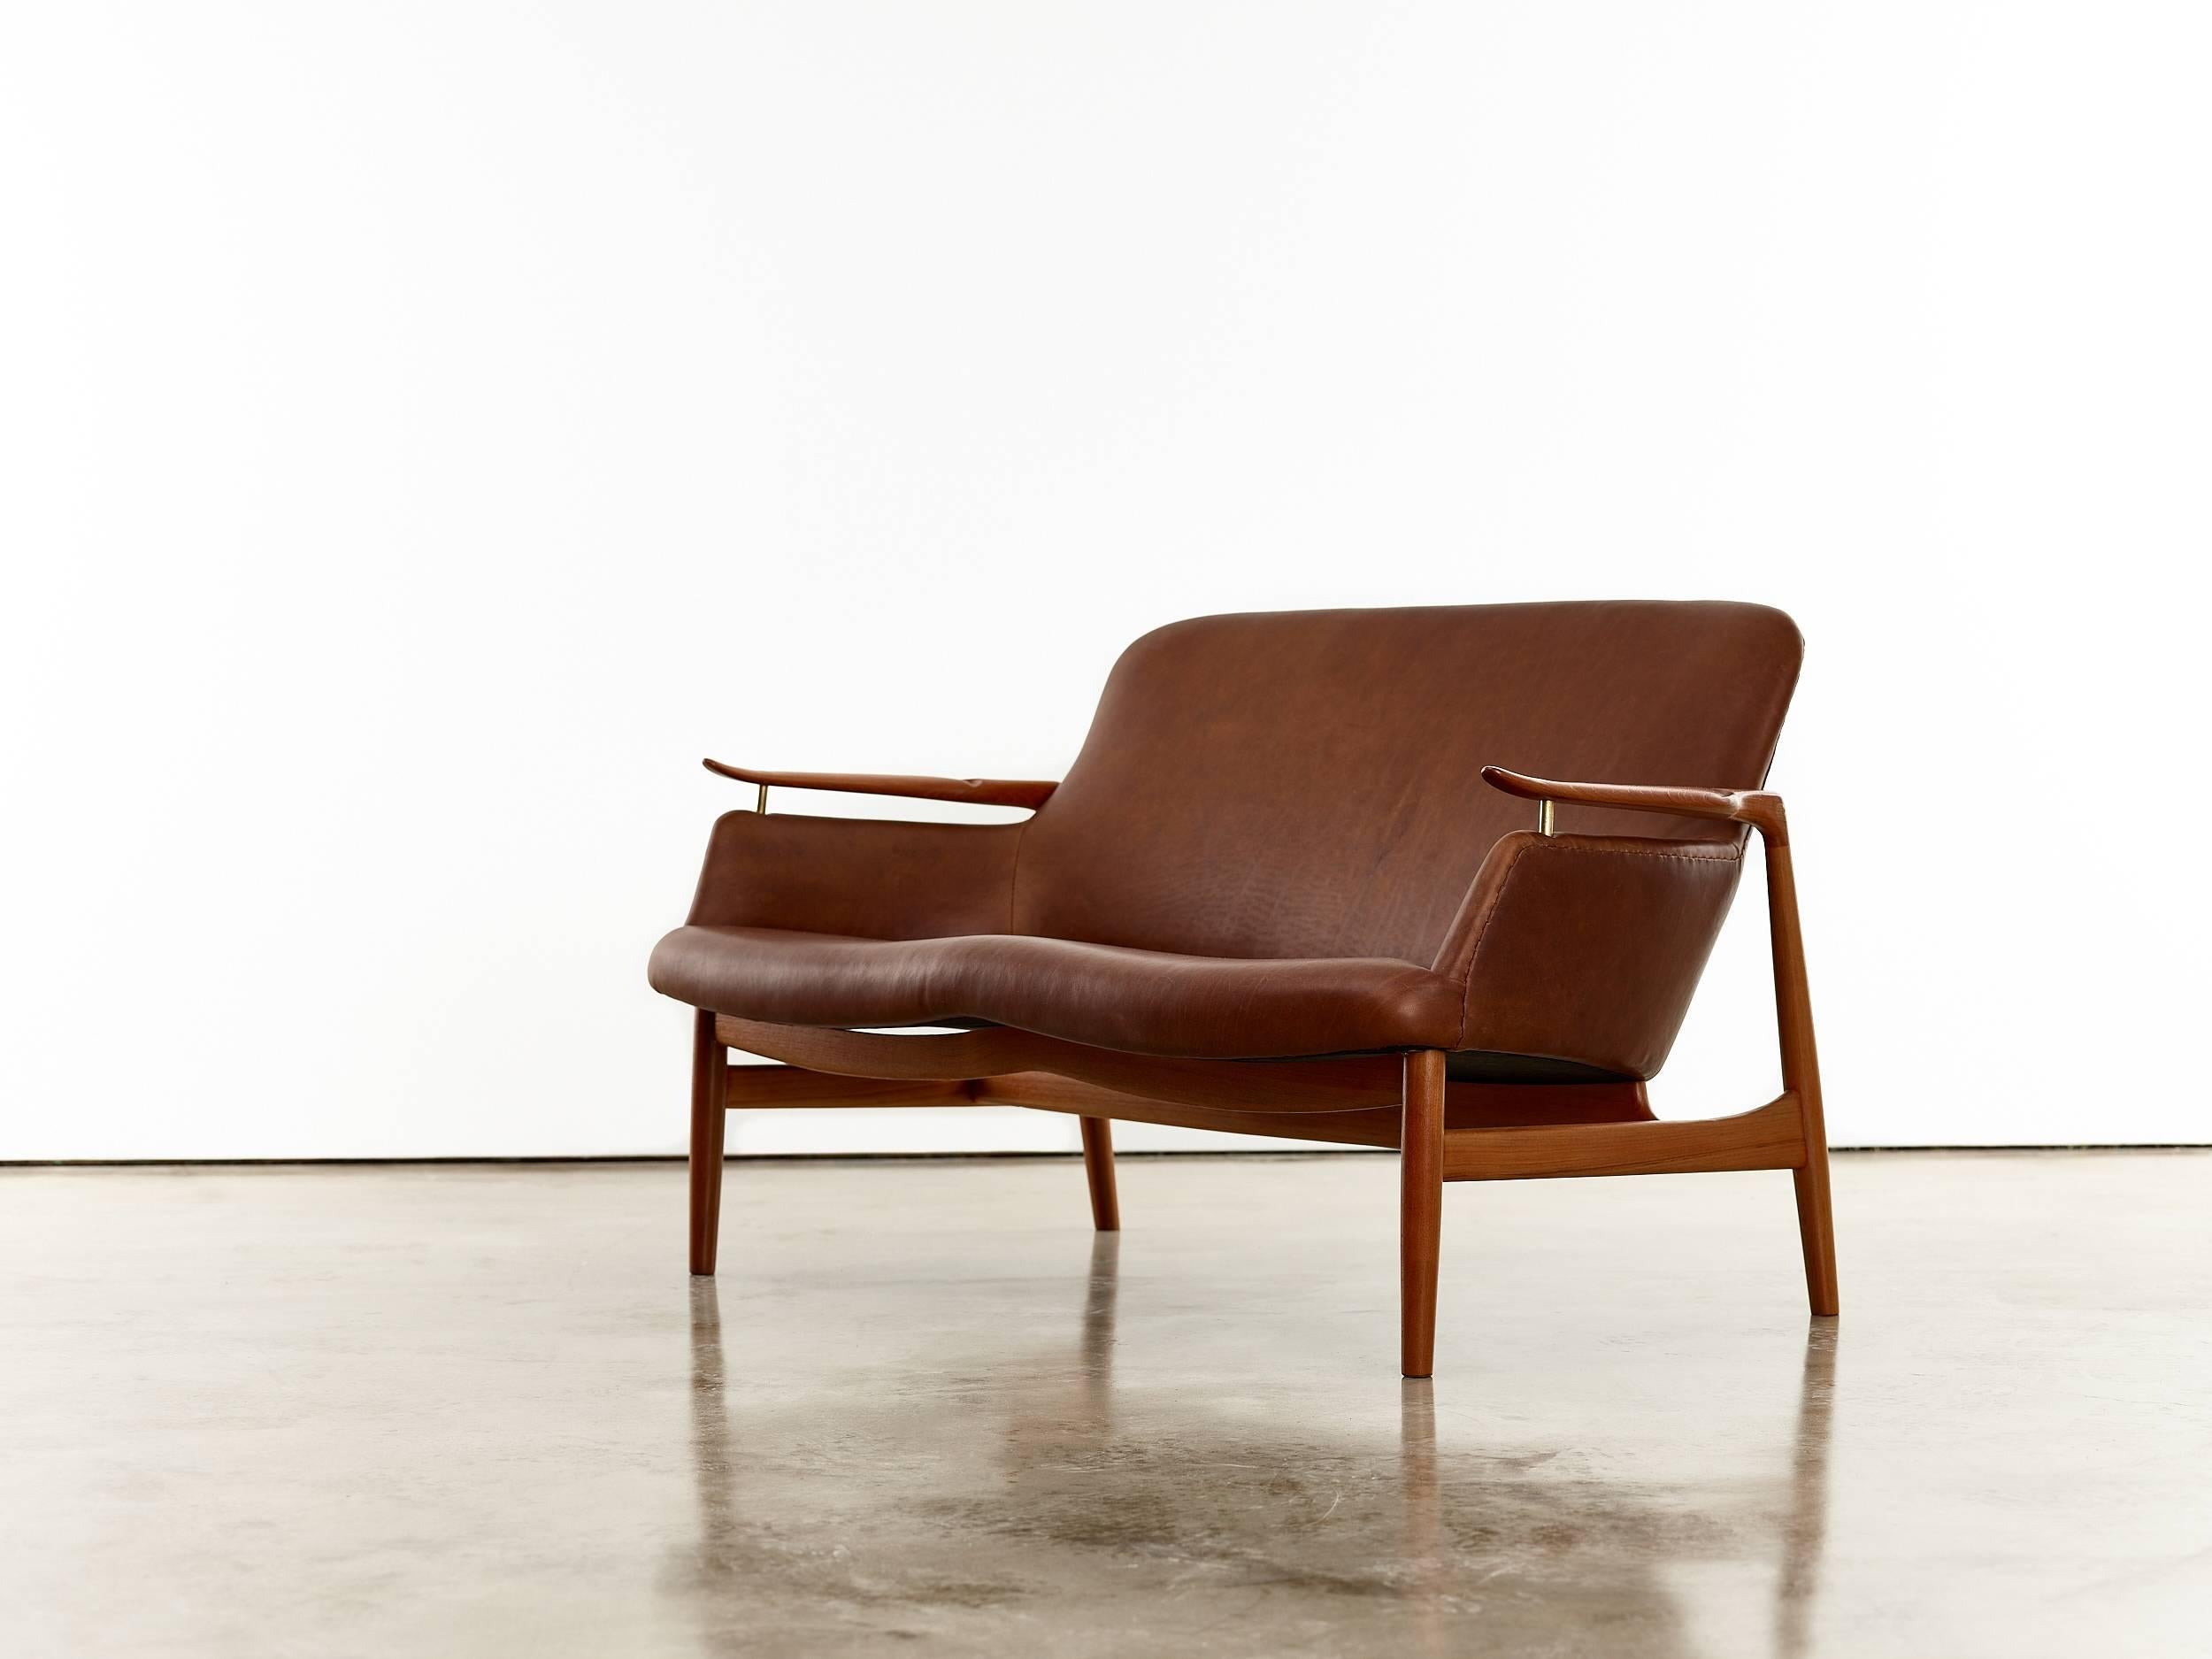 Finn Juhl two-seat sofa and lounge chairs, Model no. NV53 

Copenhagen, Denmark, circa 1950s. 

Executed by cabinetmaker Niels Vodder. 

Teak, cognac leather, brass. 

Sofa 73.8 x 128.7 x 78 cm 29 x 50 5/8 x 30 3/4 in chairs (ea) 73.1 x 72 x 81.4 cm